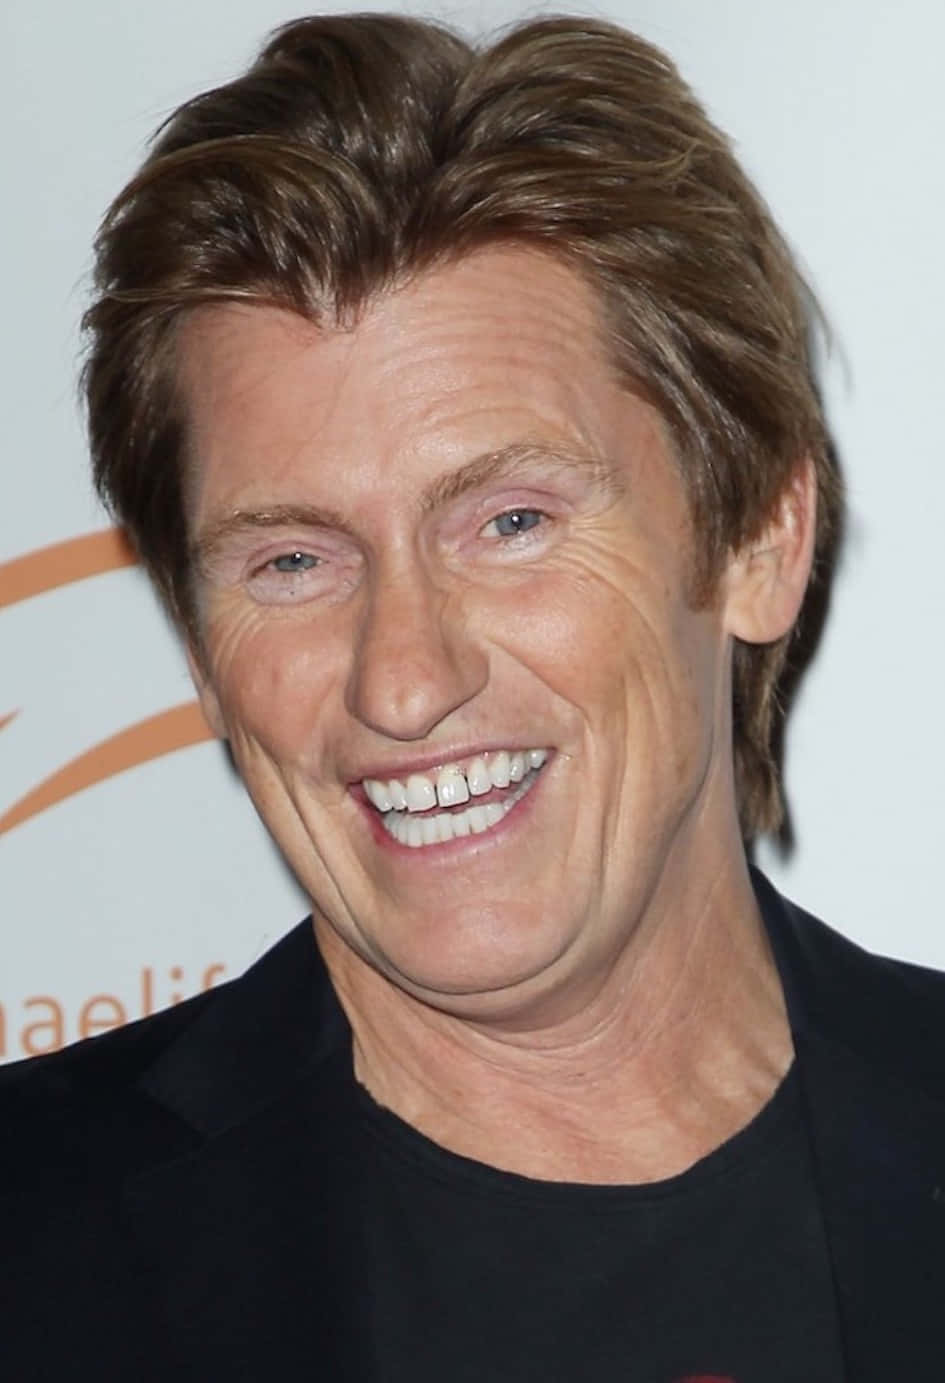 Comedian Denis Leary leaning on a brick wall Wallpaper